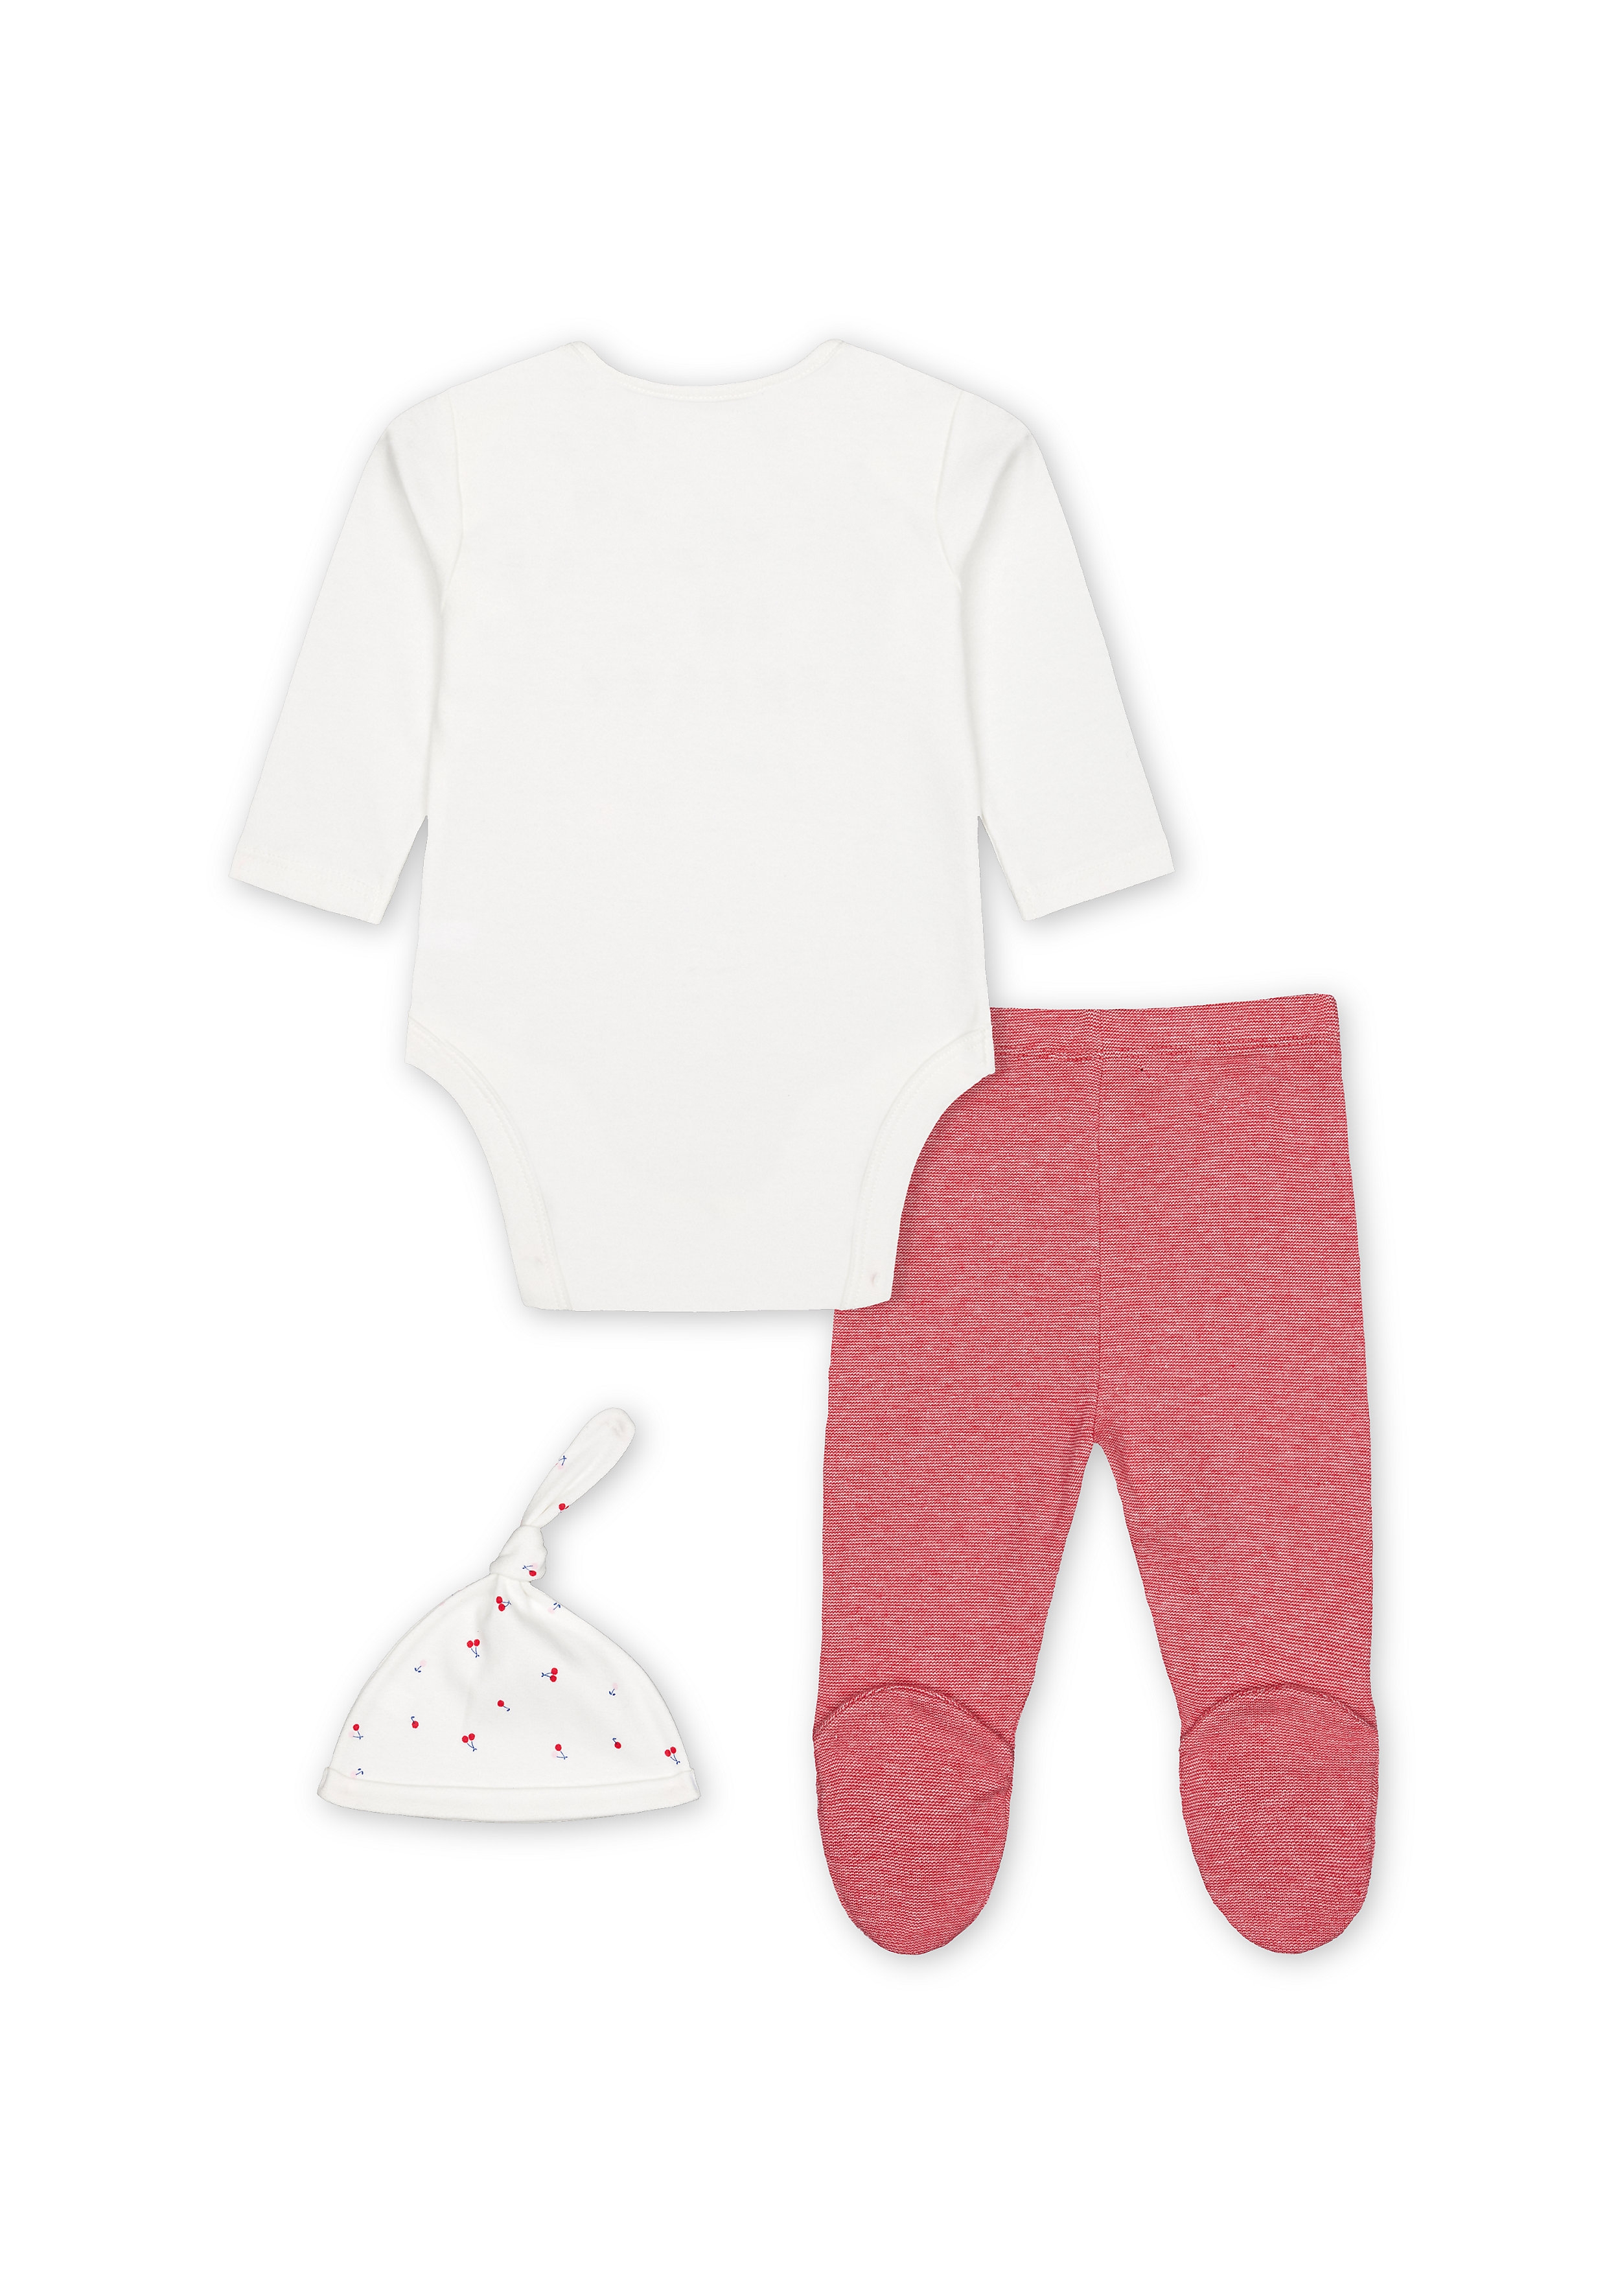 Mothercare | Girls Full Sleeves 3 Piece Set - Pink 1